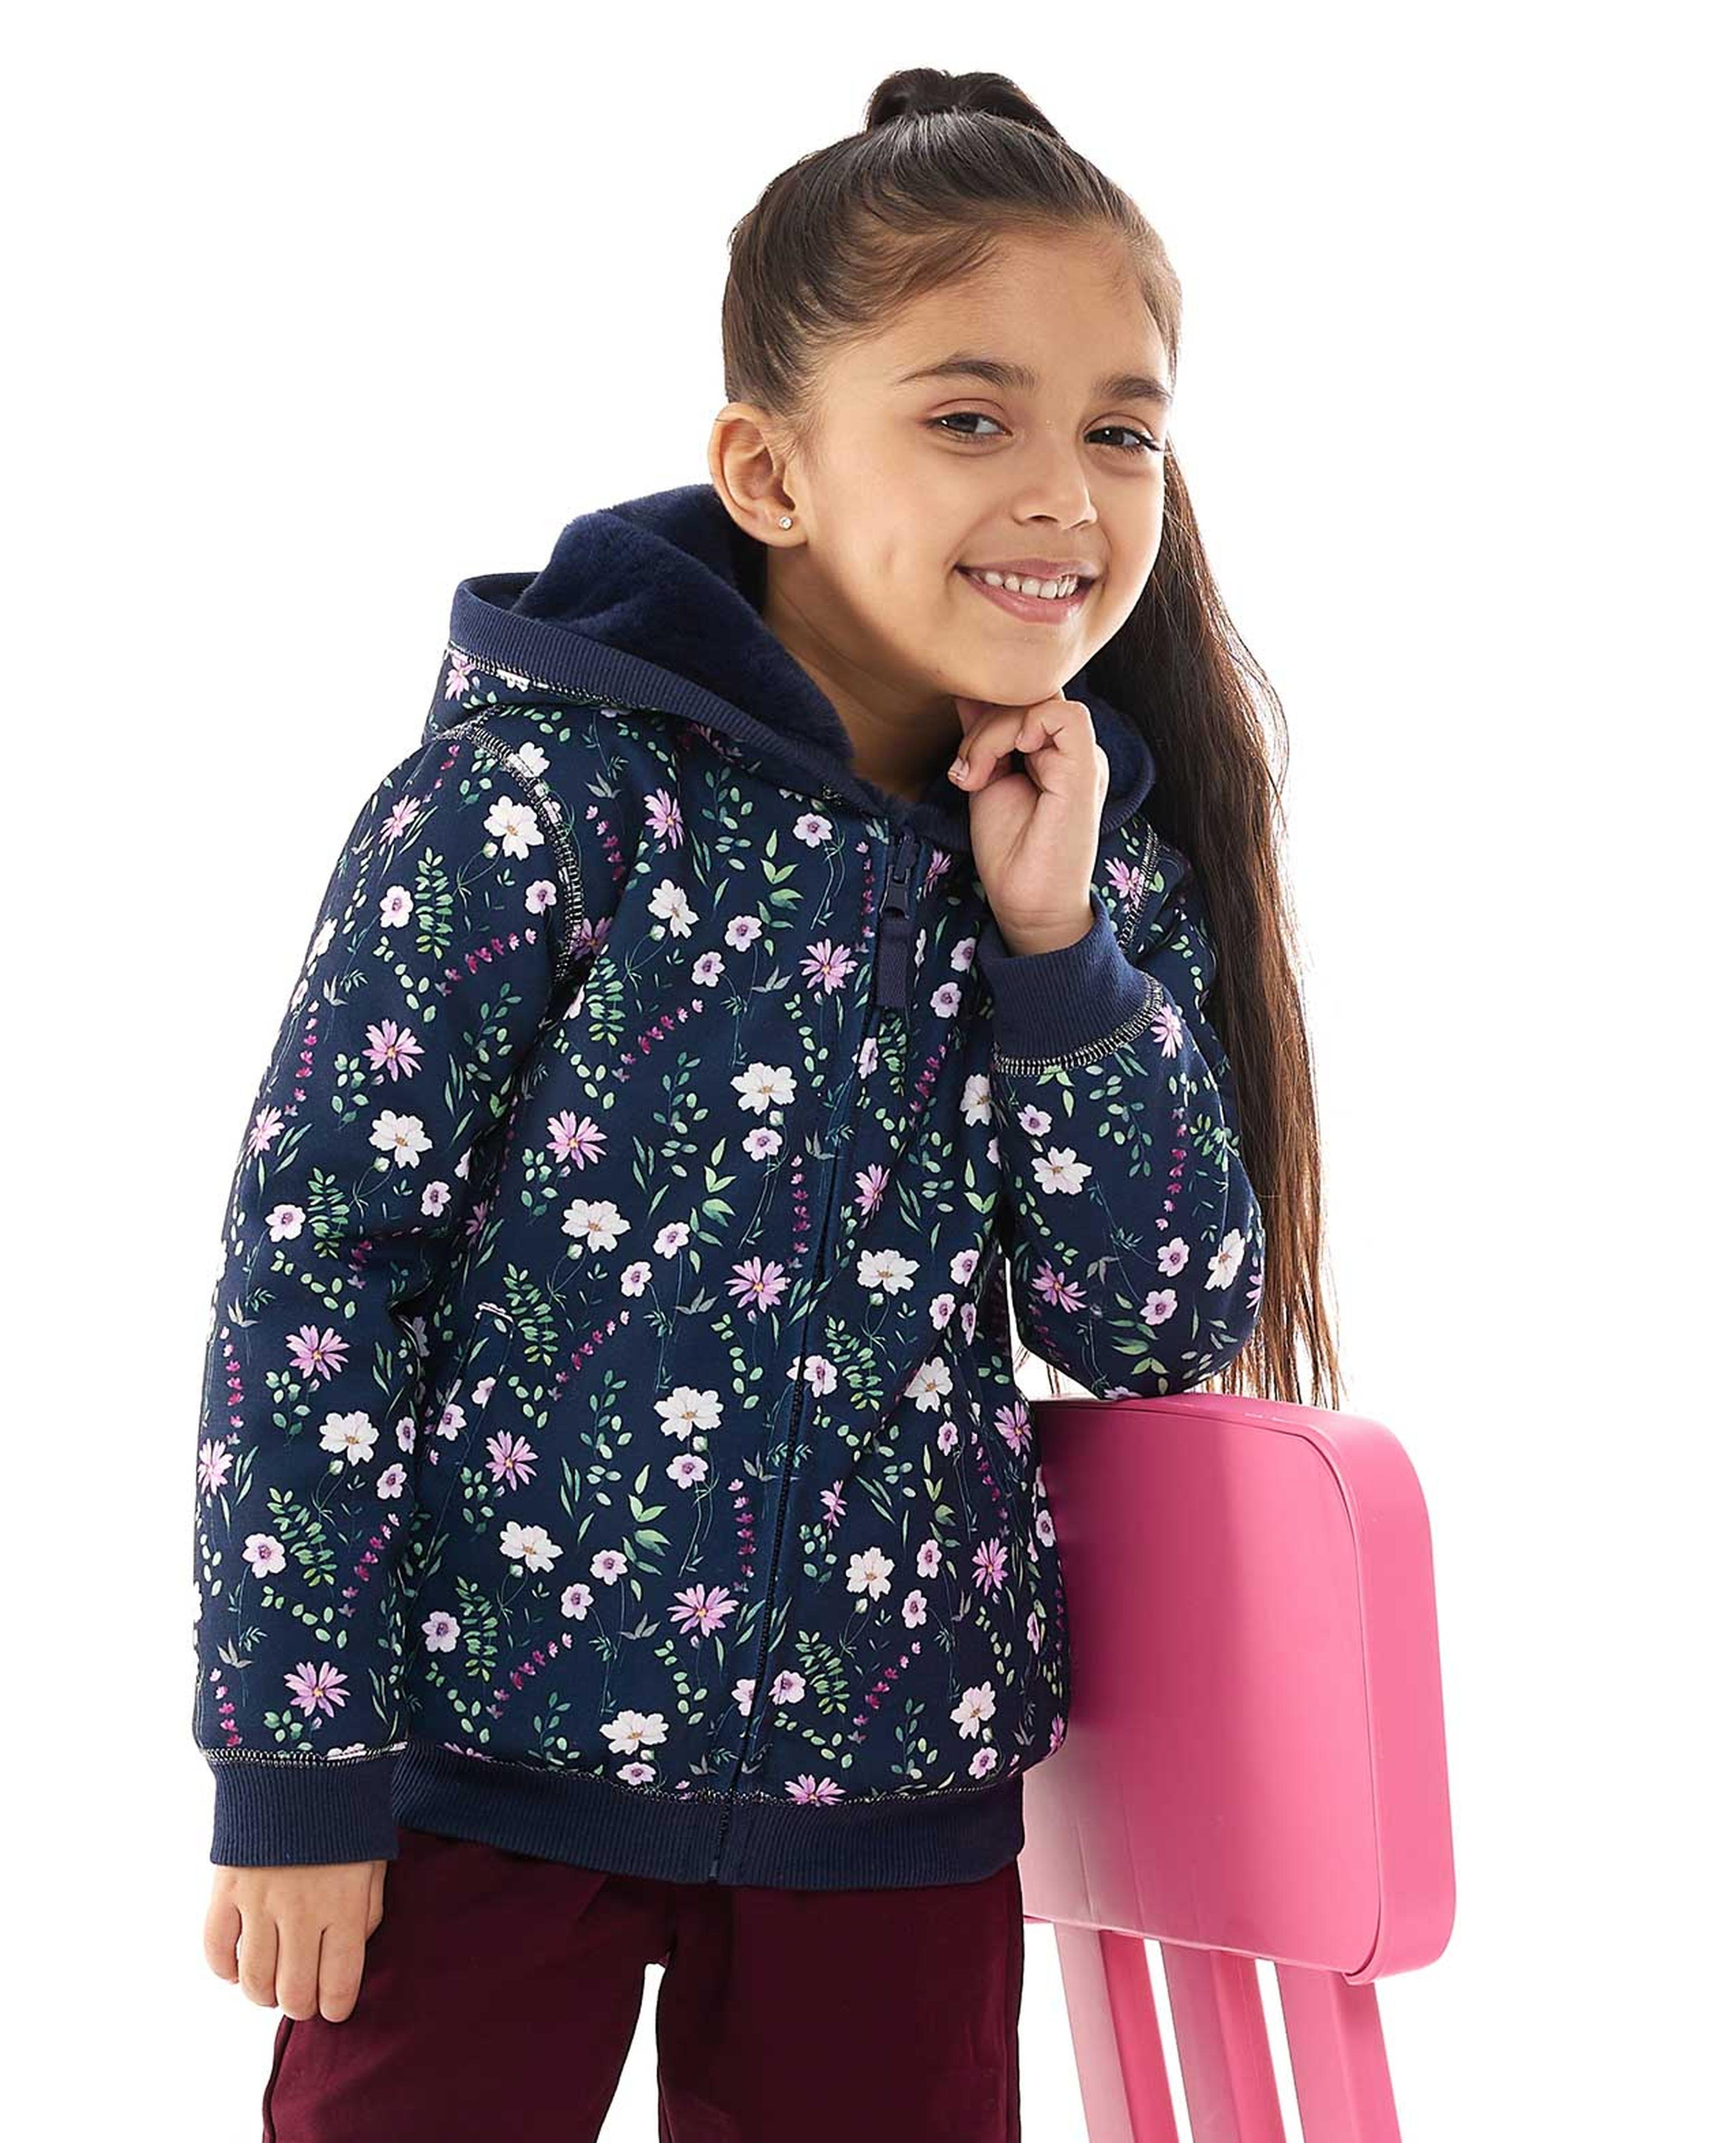 Floral Print Hooded Jacket with Zipper Closure